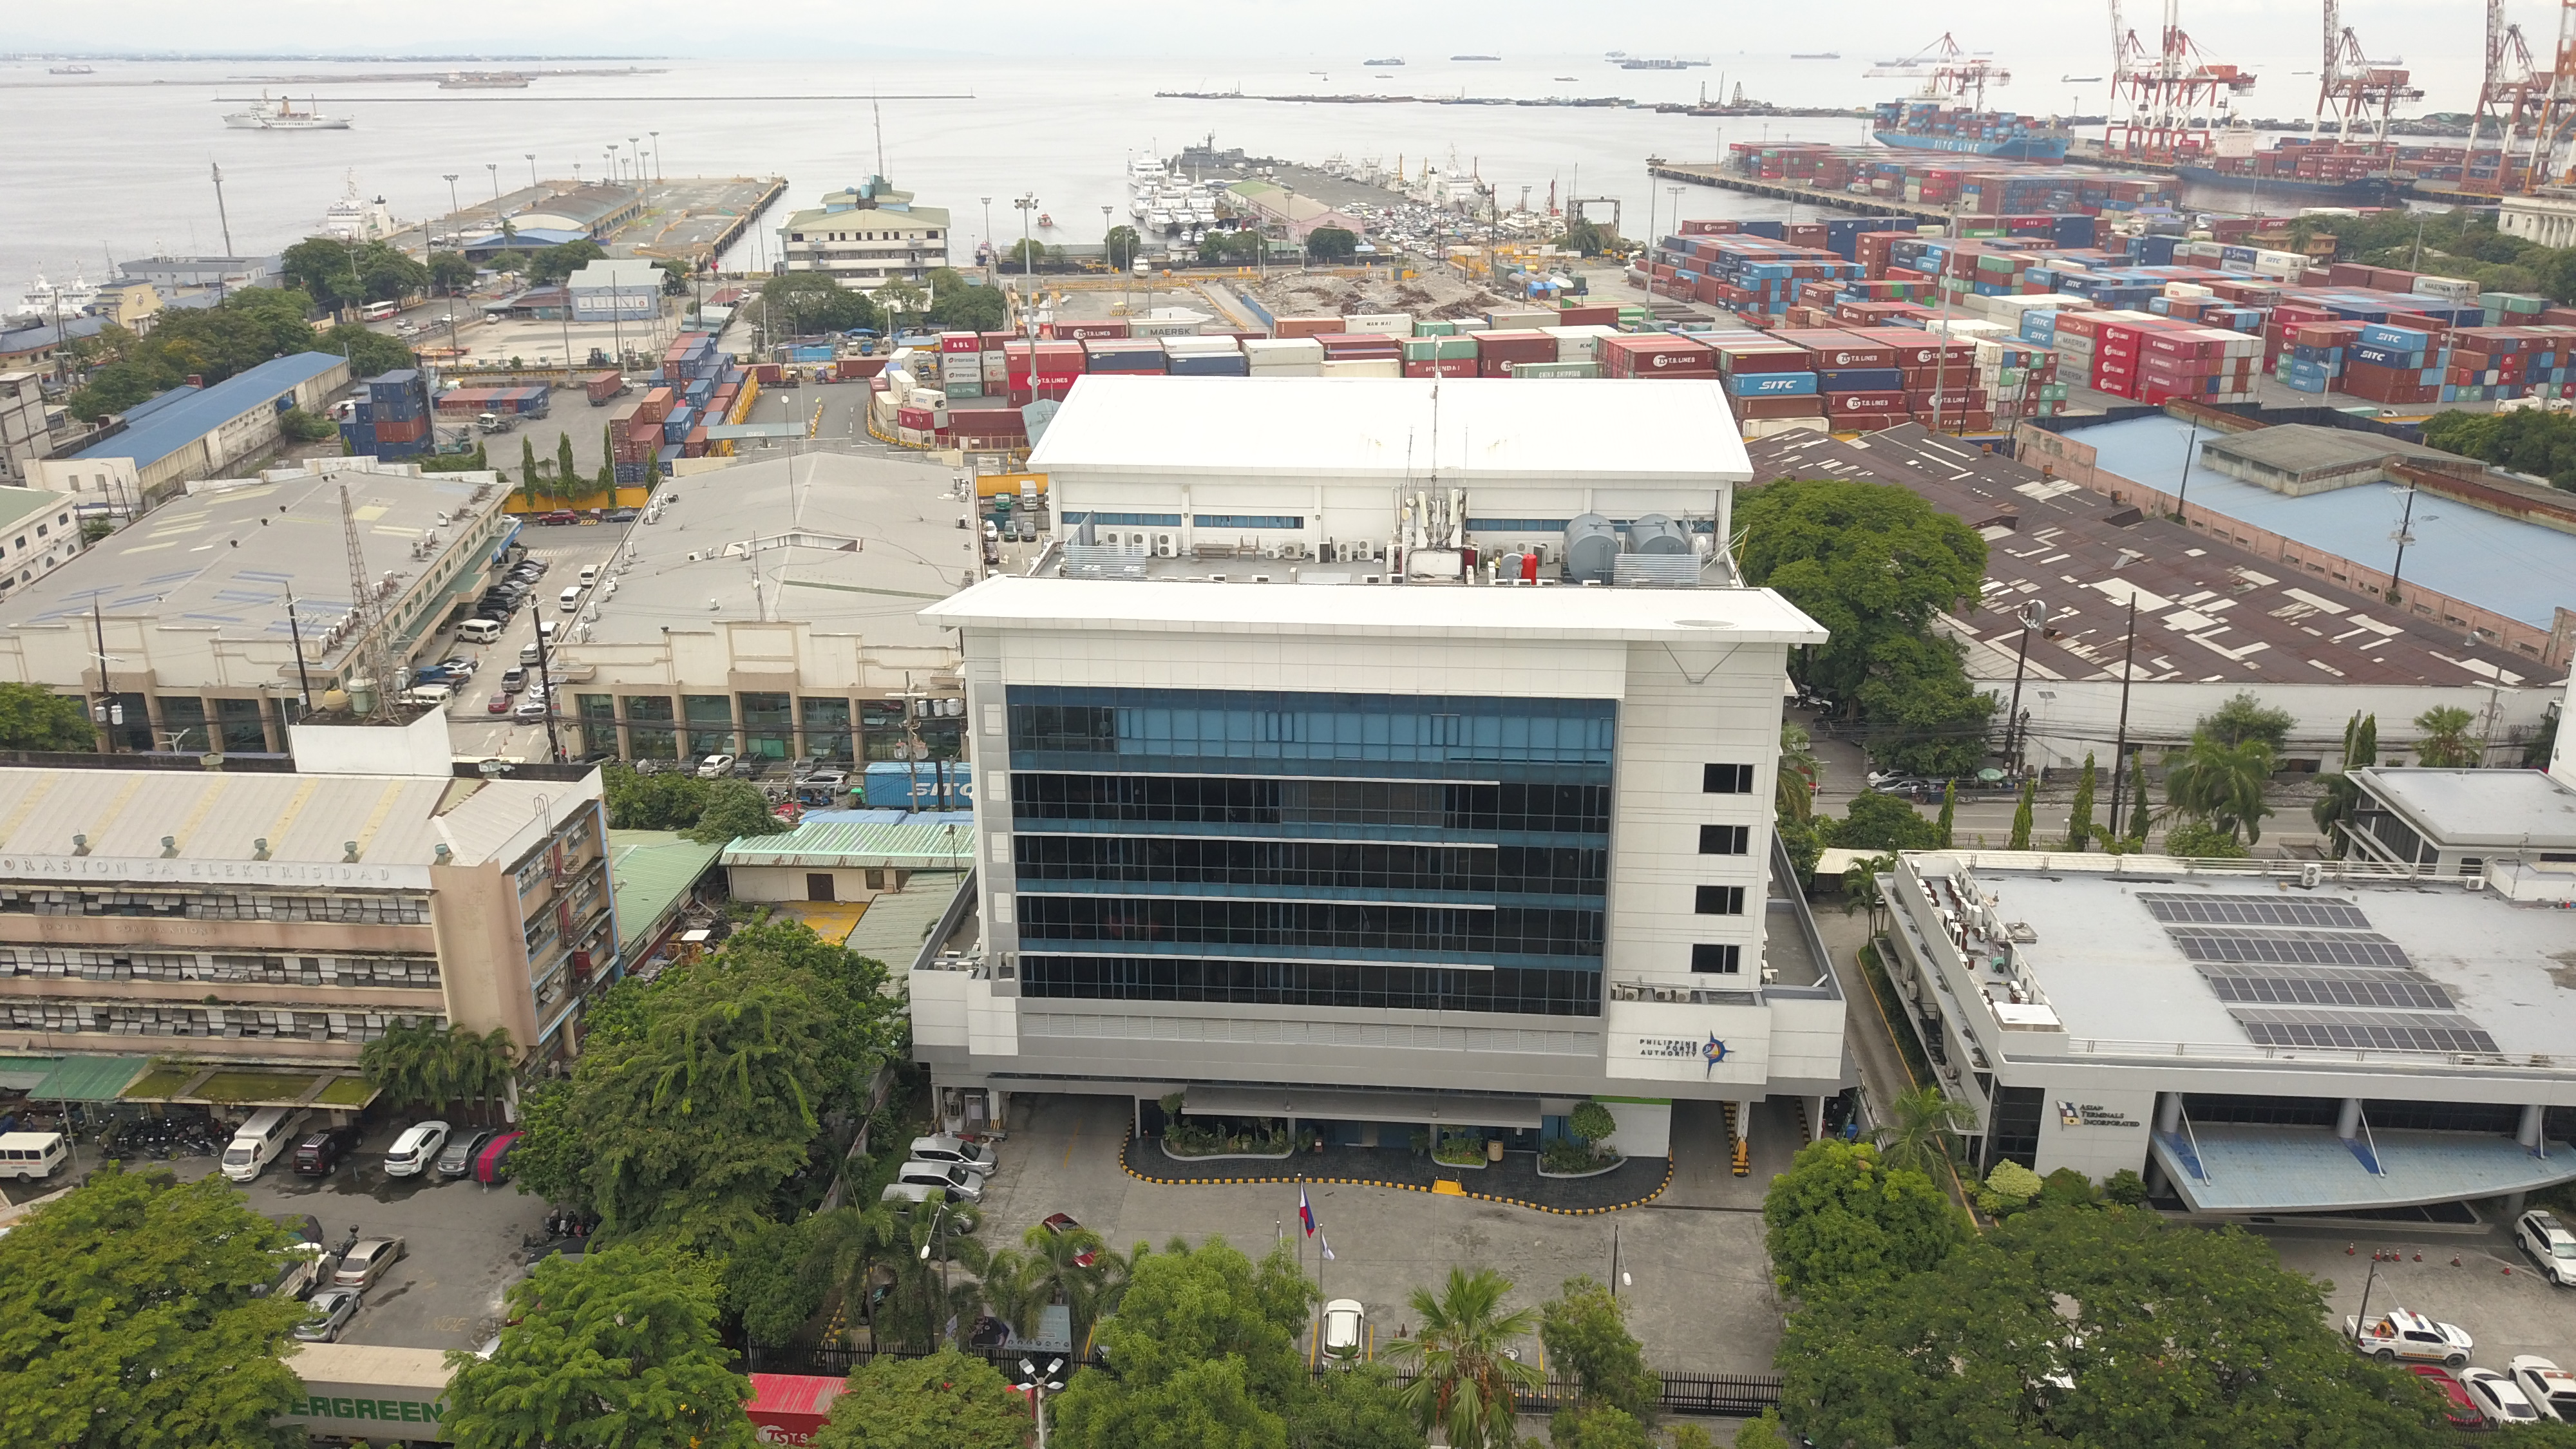 About the Philippine Ports Authority | APSN